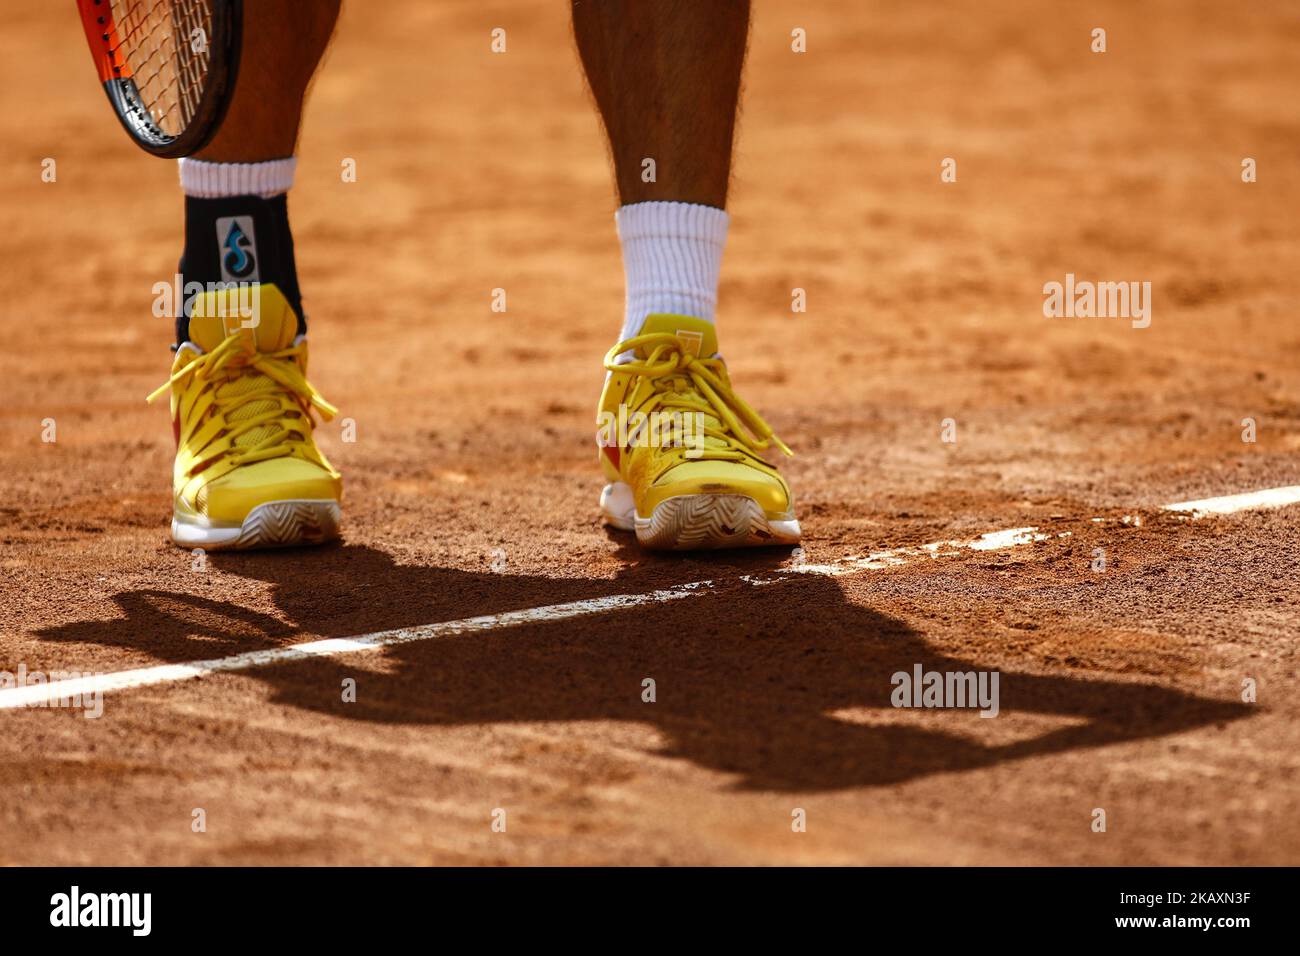 Kei Nishikori from Japan Nike shoes during the Barcelona Open Banc Sabadell  66 Trofeo Conde de Godo at Reial Club Tenis Barcelona on 24 of April of  2018 in Barcelona. (Photo by